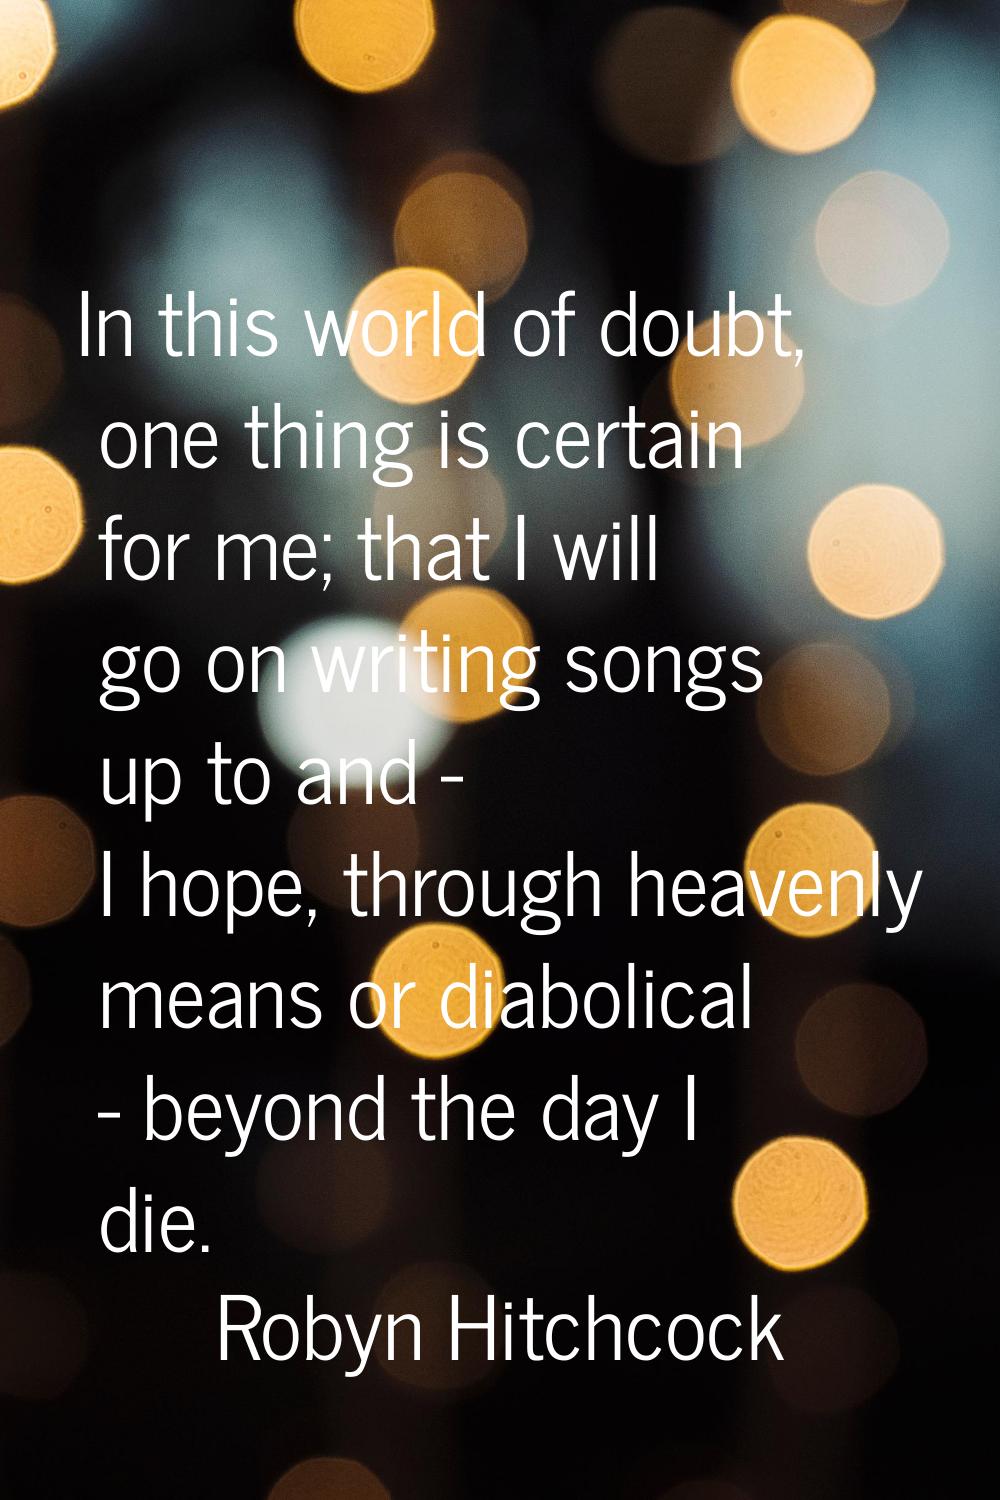 In this world of doubt, one thing is certain for me; that I will go on writing songs up to and - I 